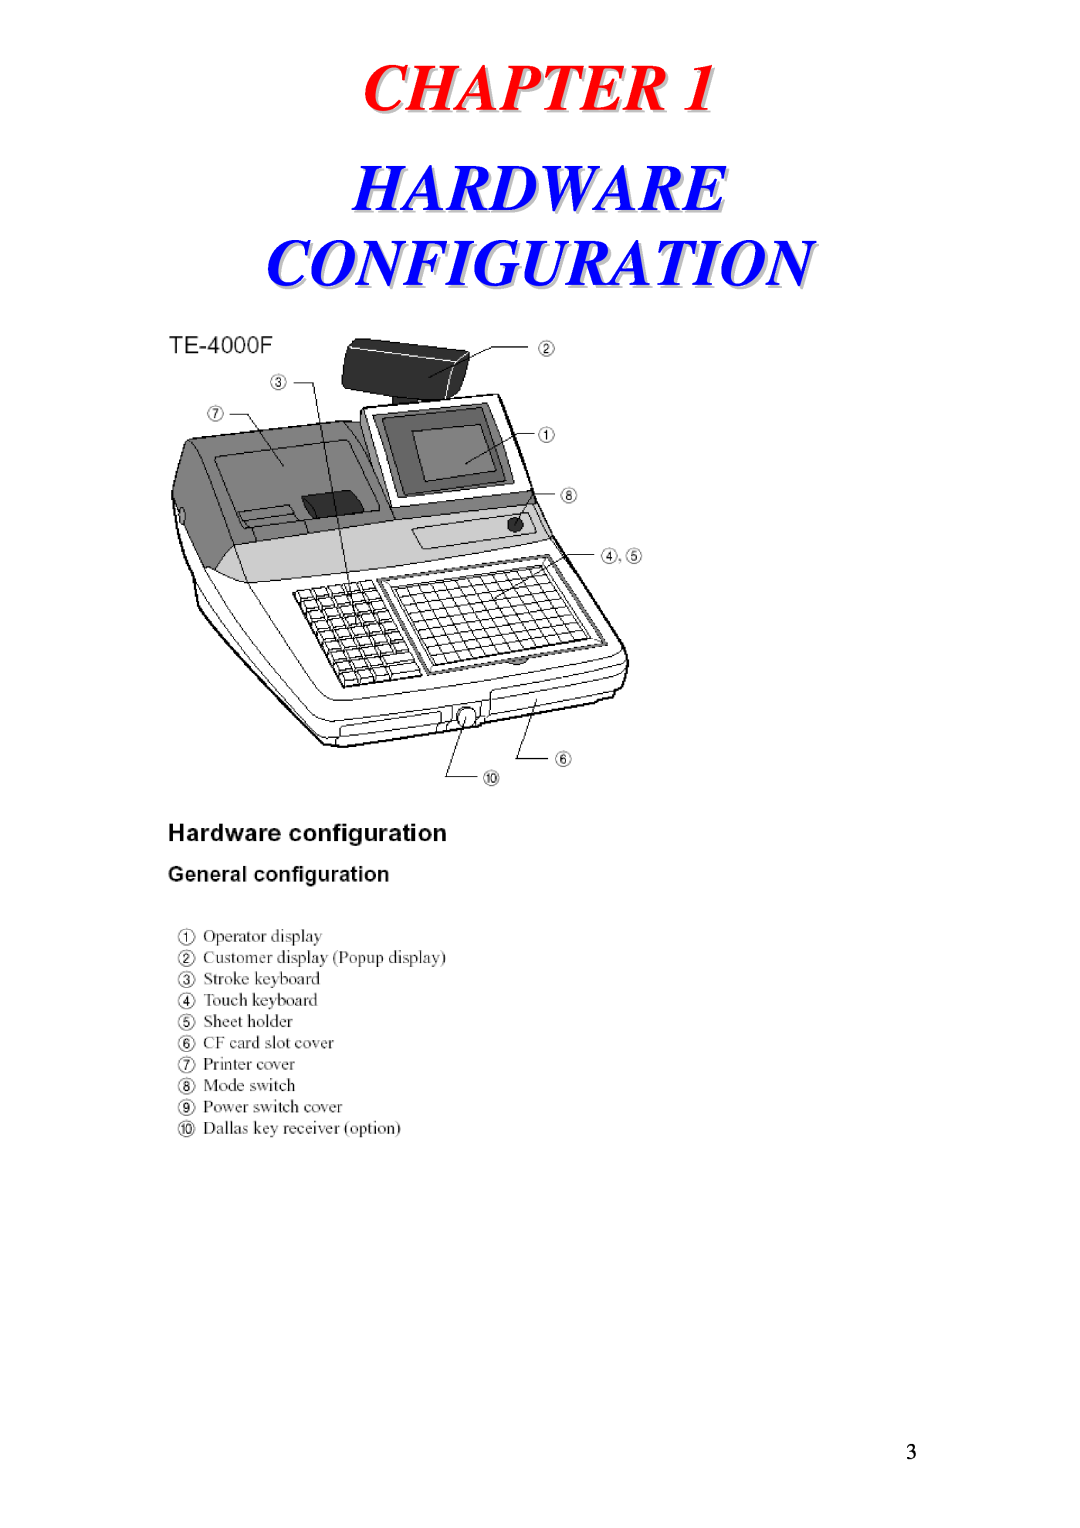 Delta TE-4000 manual Chapter, Hardware Configuration 